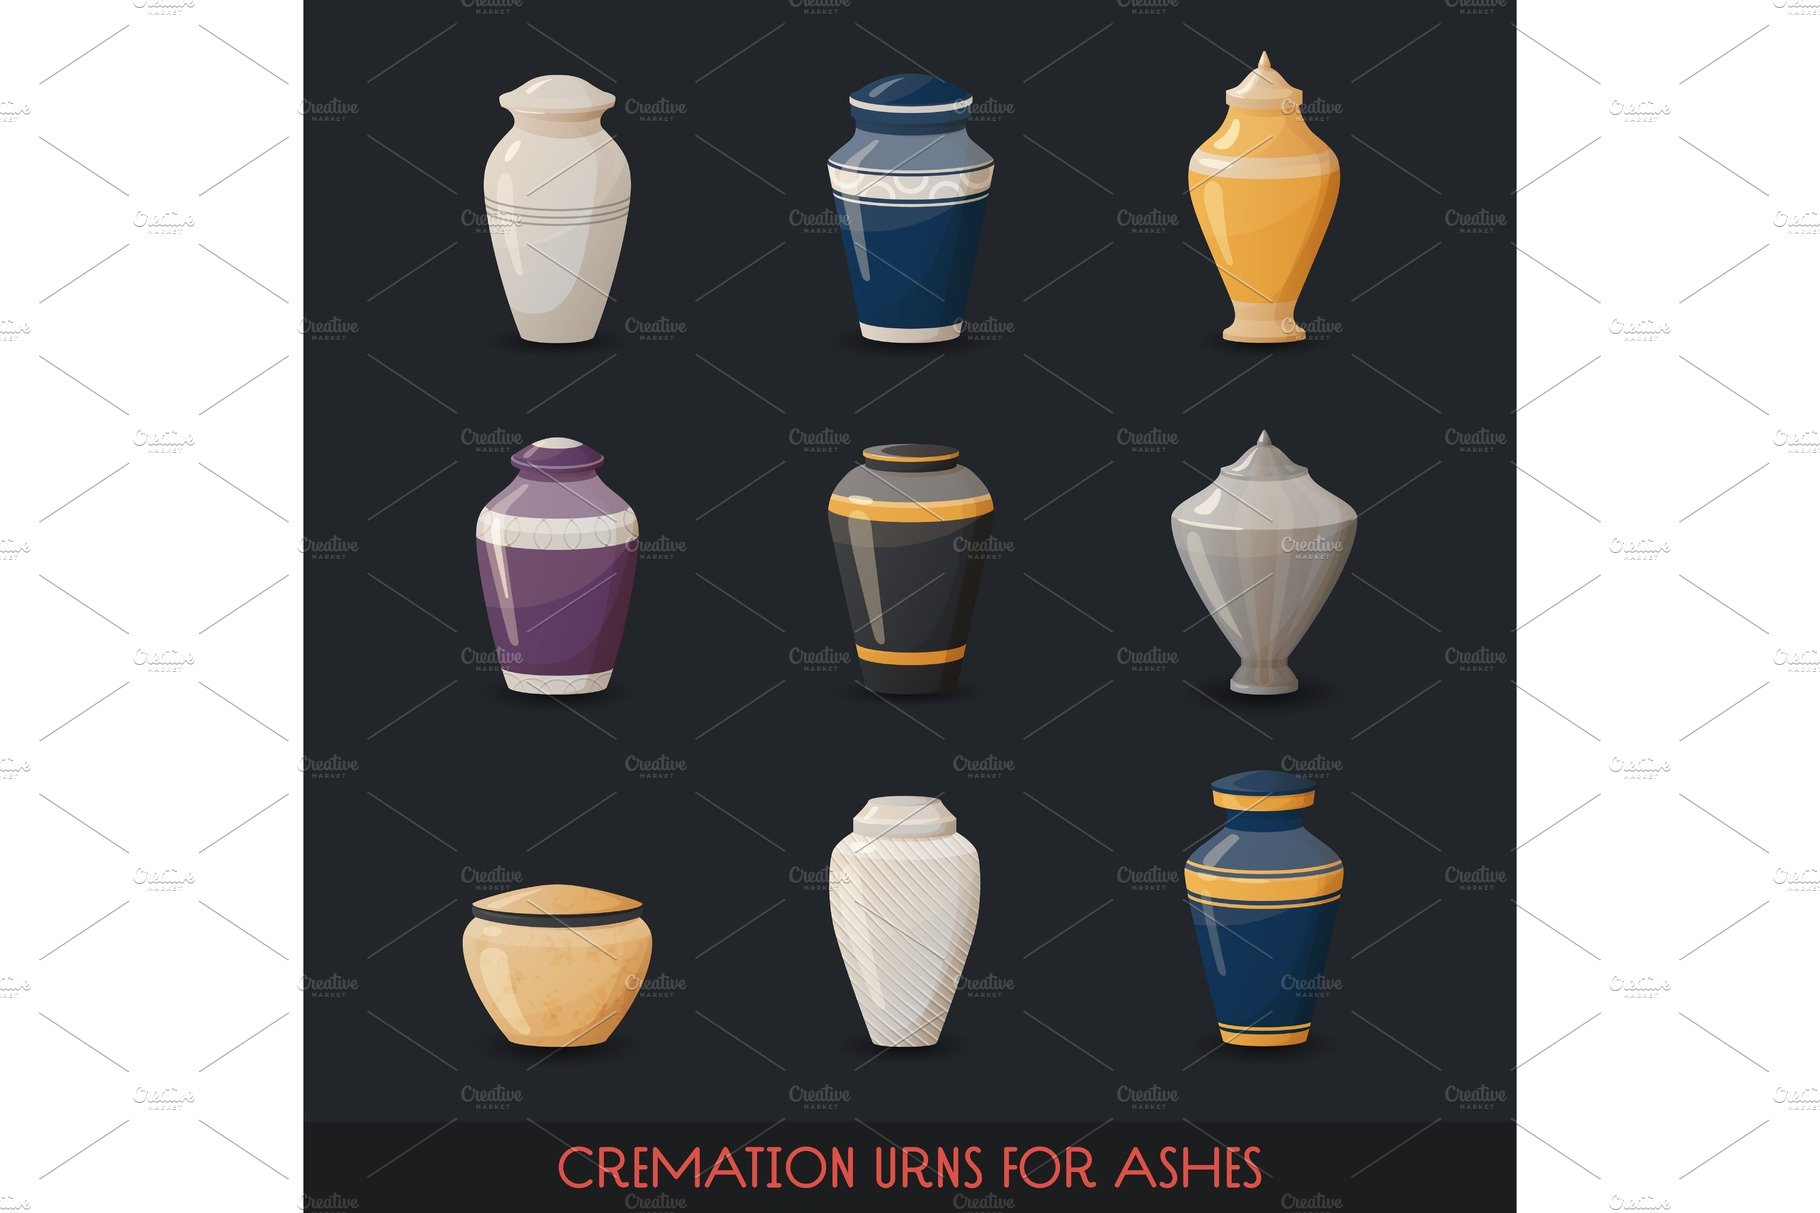 Urns for cremations, vase for cremated body ashes cover image.